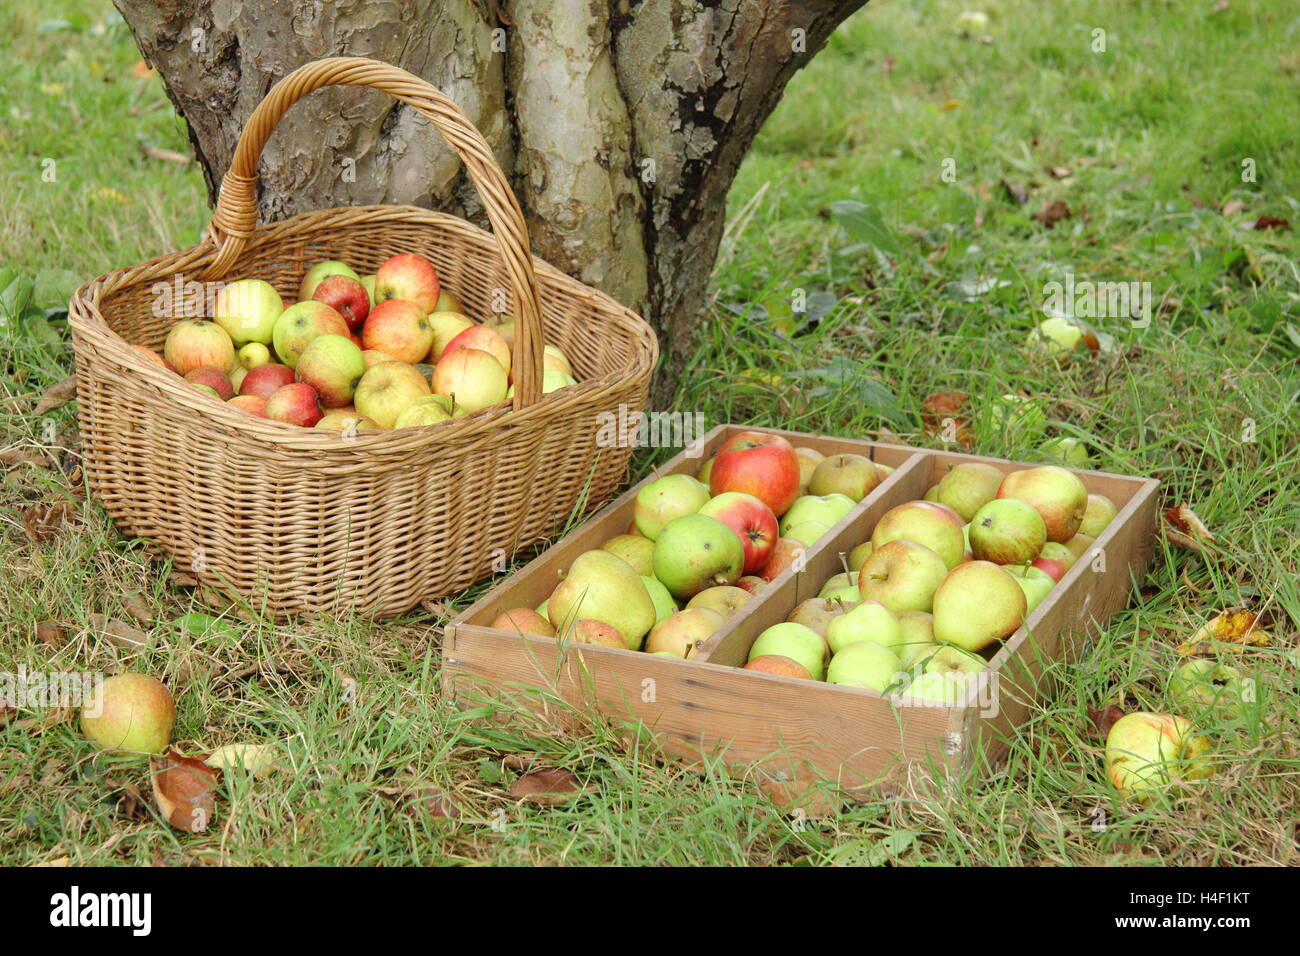 Freshly harvested old variety apples under a Bramley's Seedling apple tree in an English heritage orchard on a fine October day Stock Photo